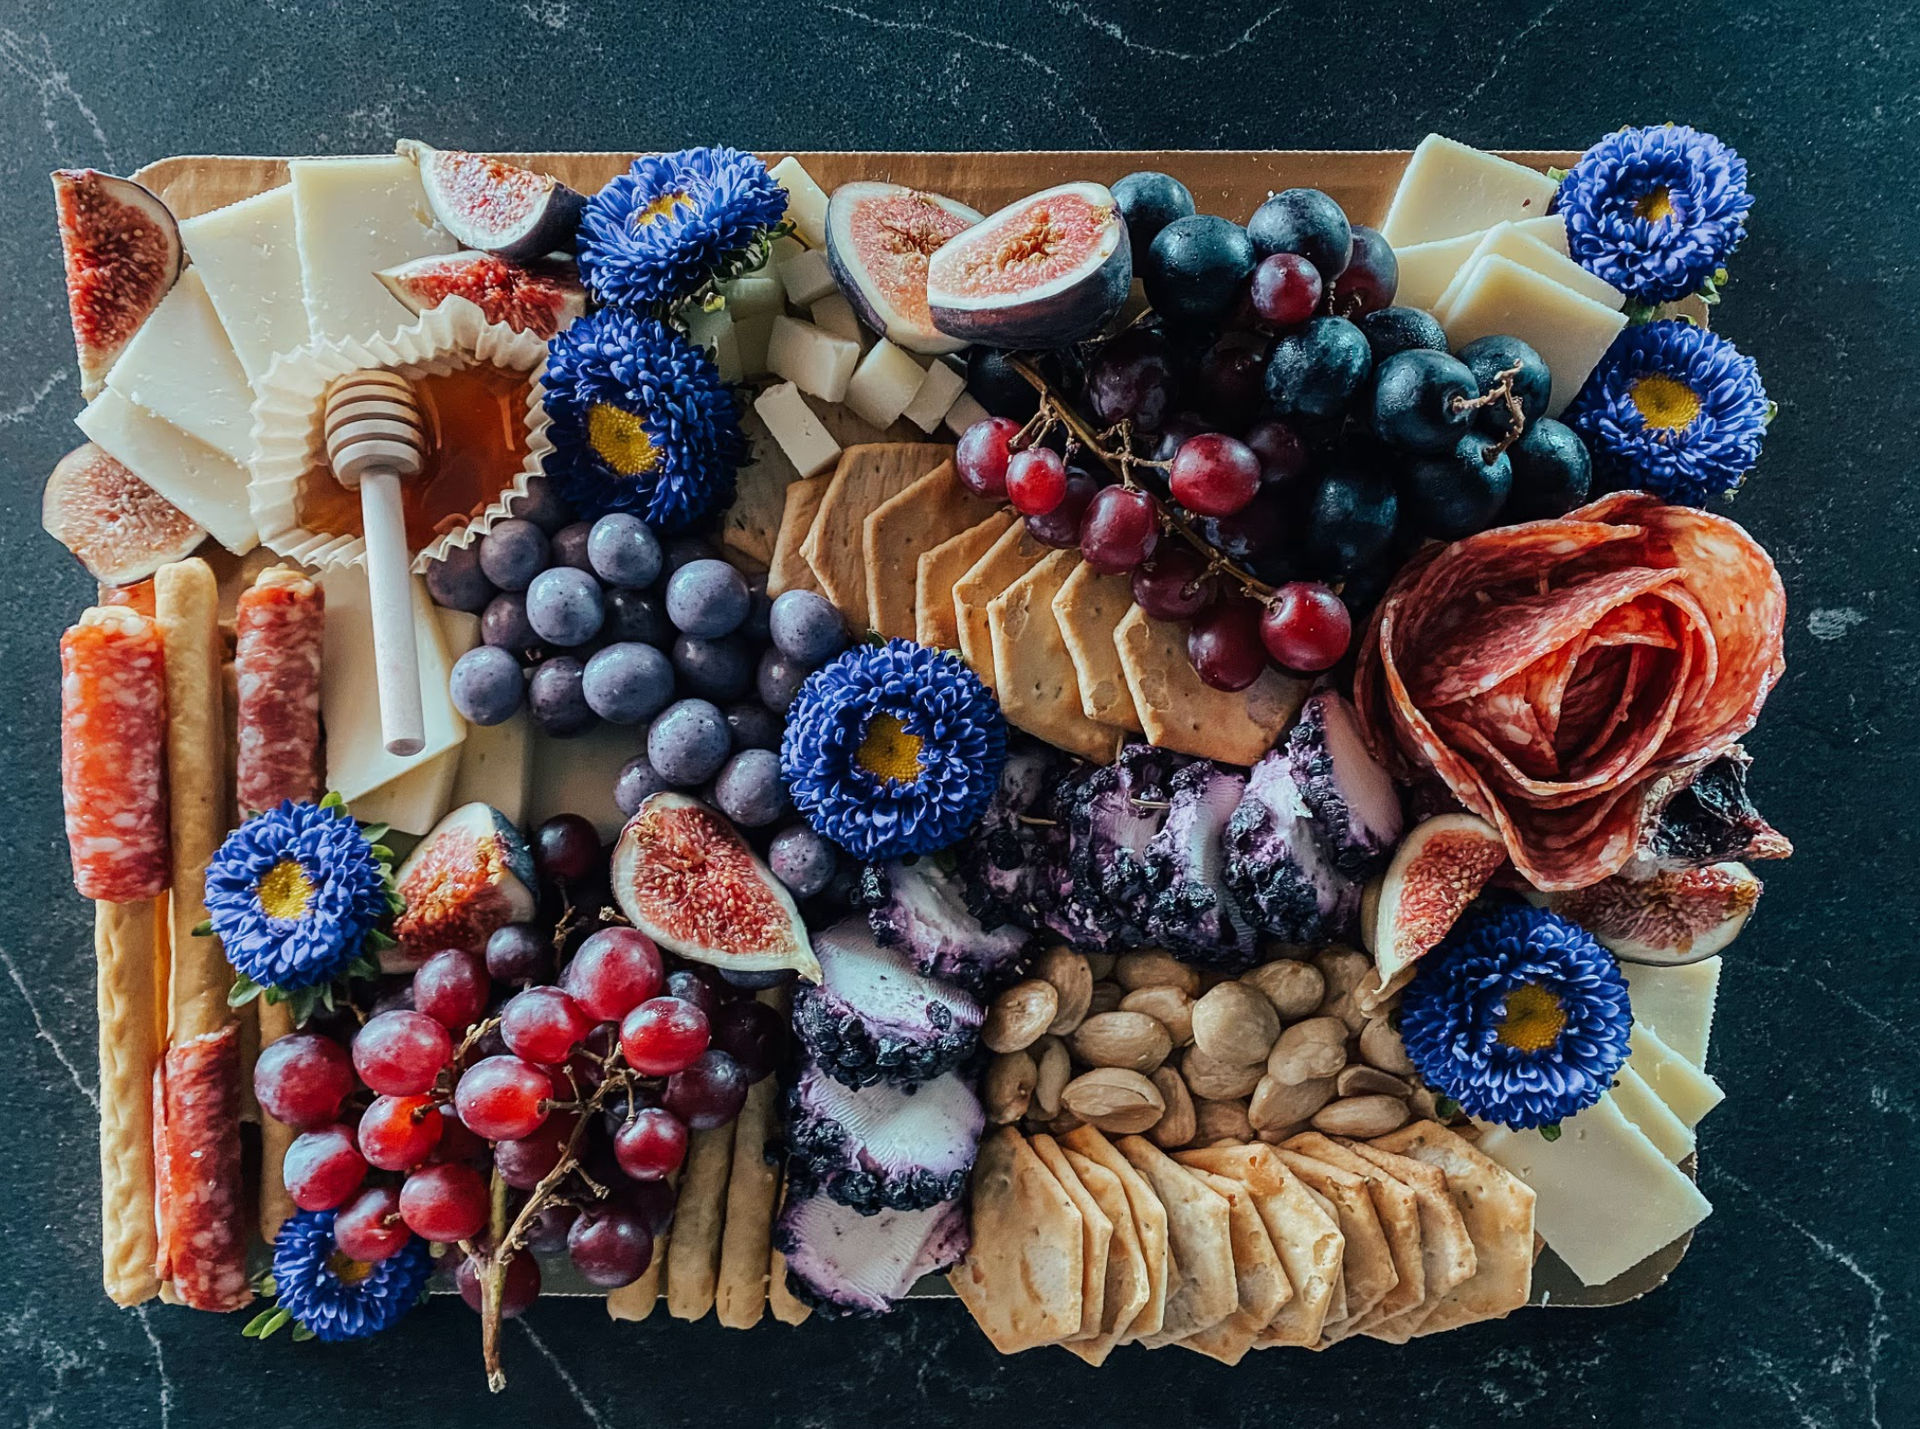 Charcuterie Houston - Luxury Cheese & Charcuterie Boards in Houston TX